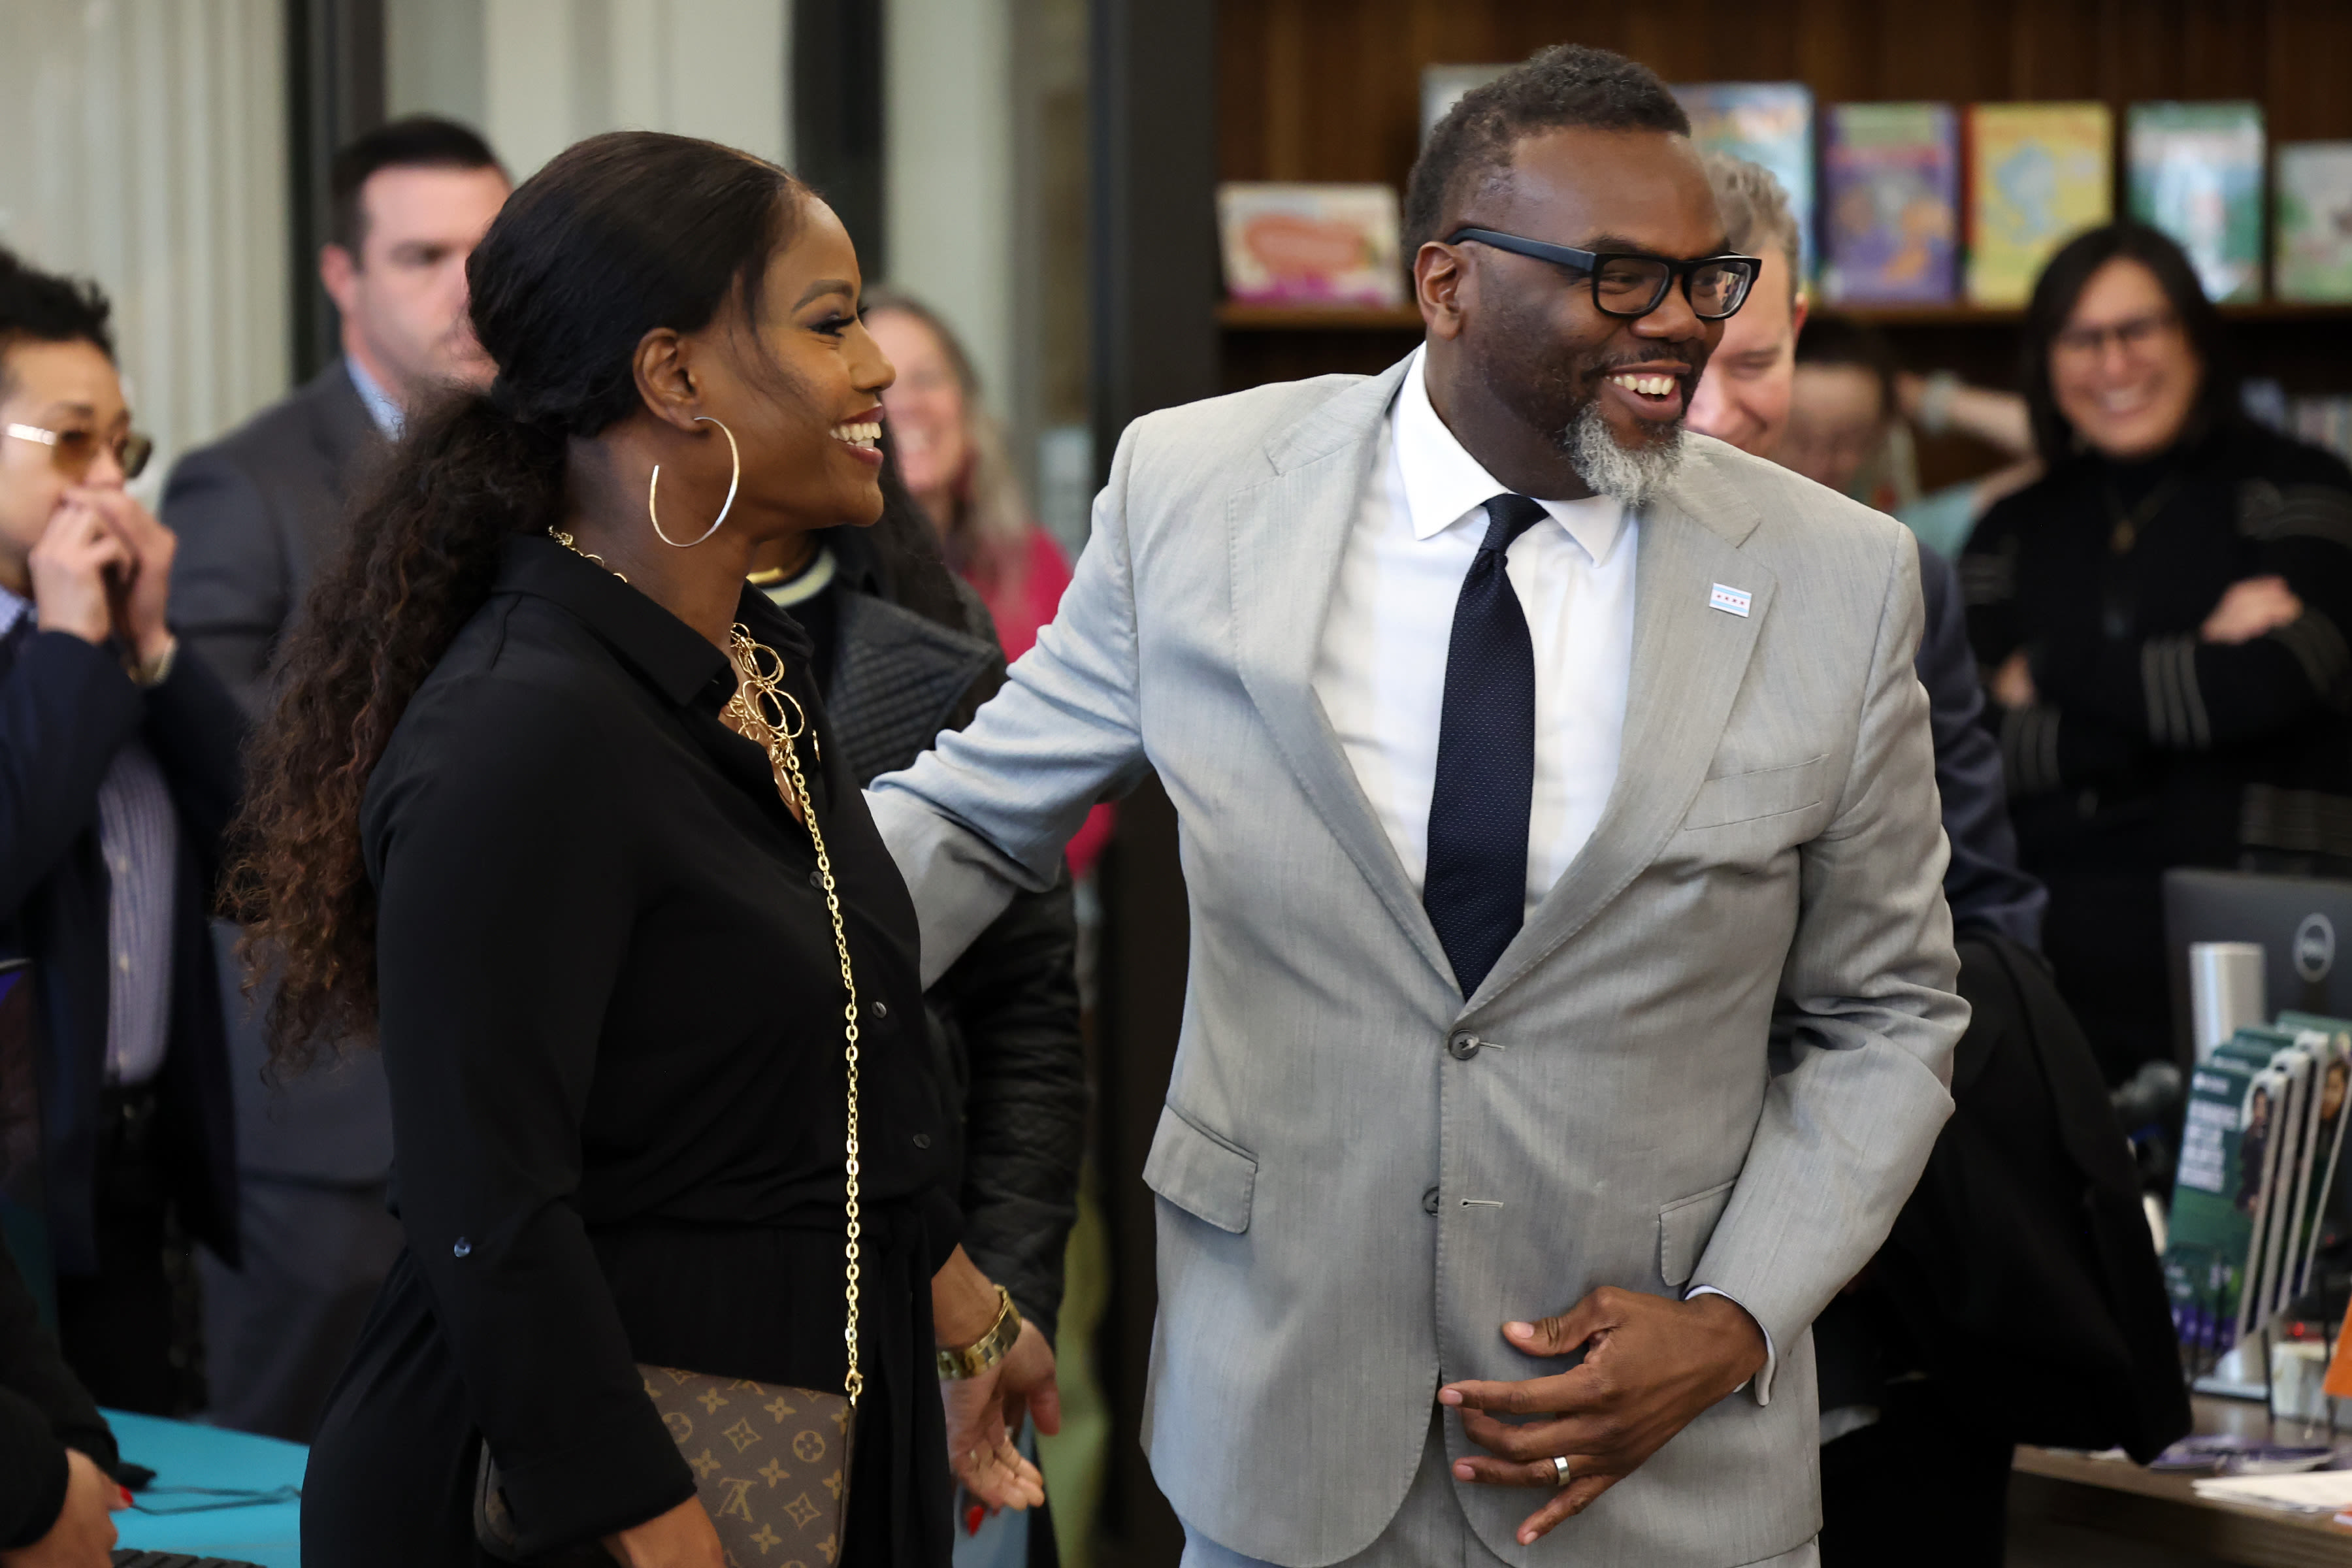 CTU’s credibility questioned in Springfield as their biggest ally, Mayor Brandon Johnson, heads to state Capitol